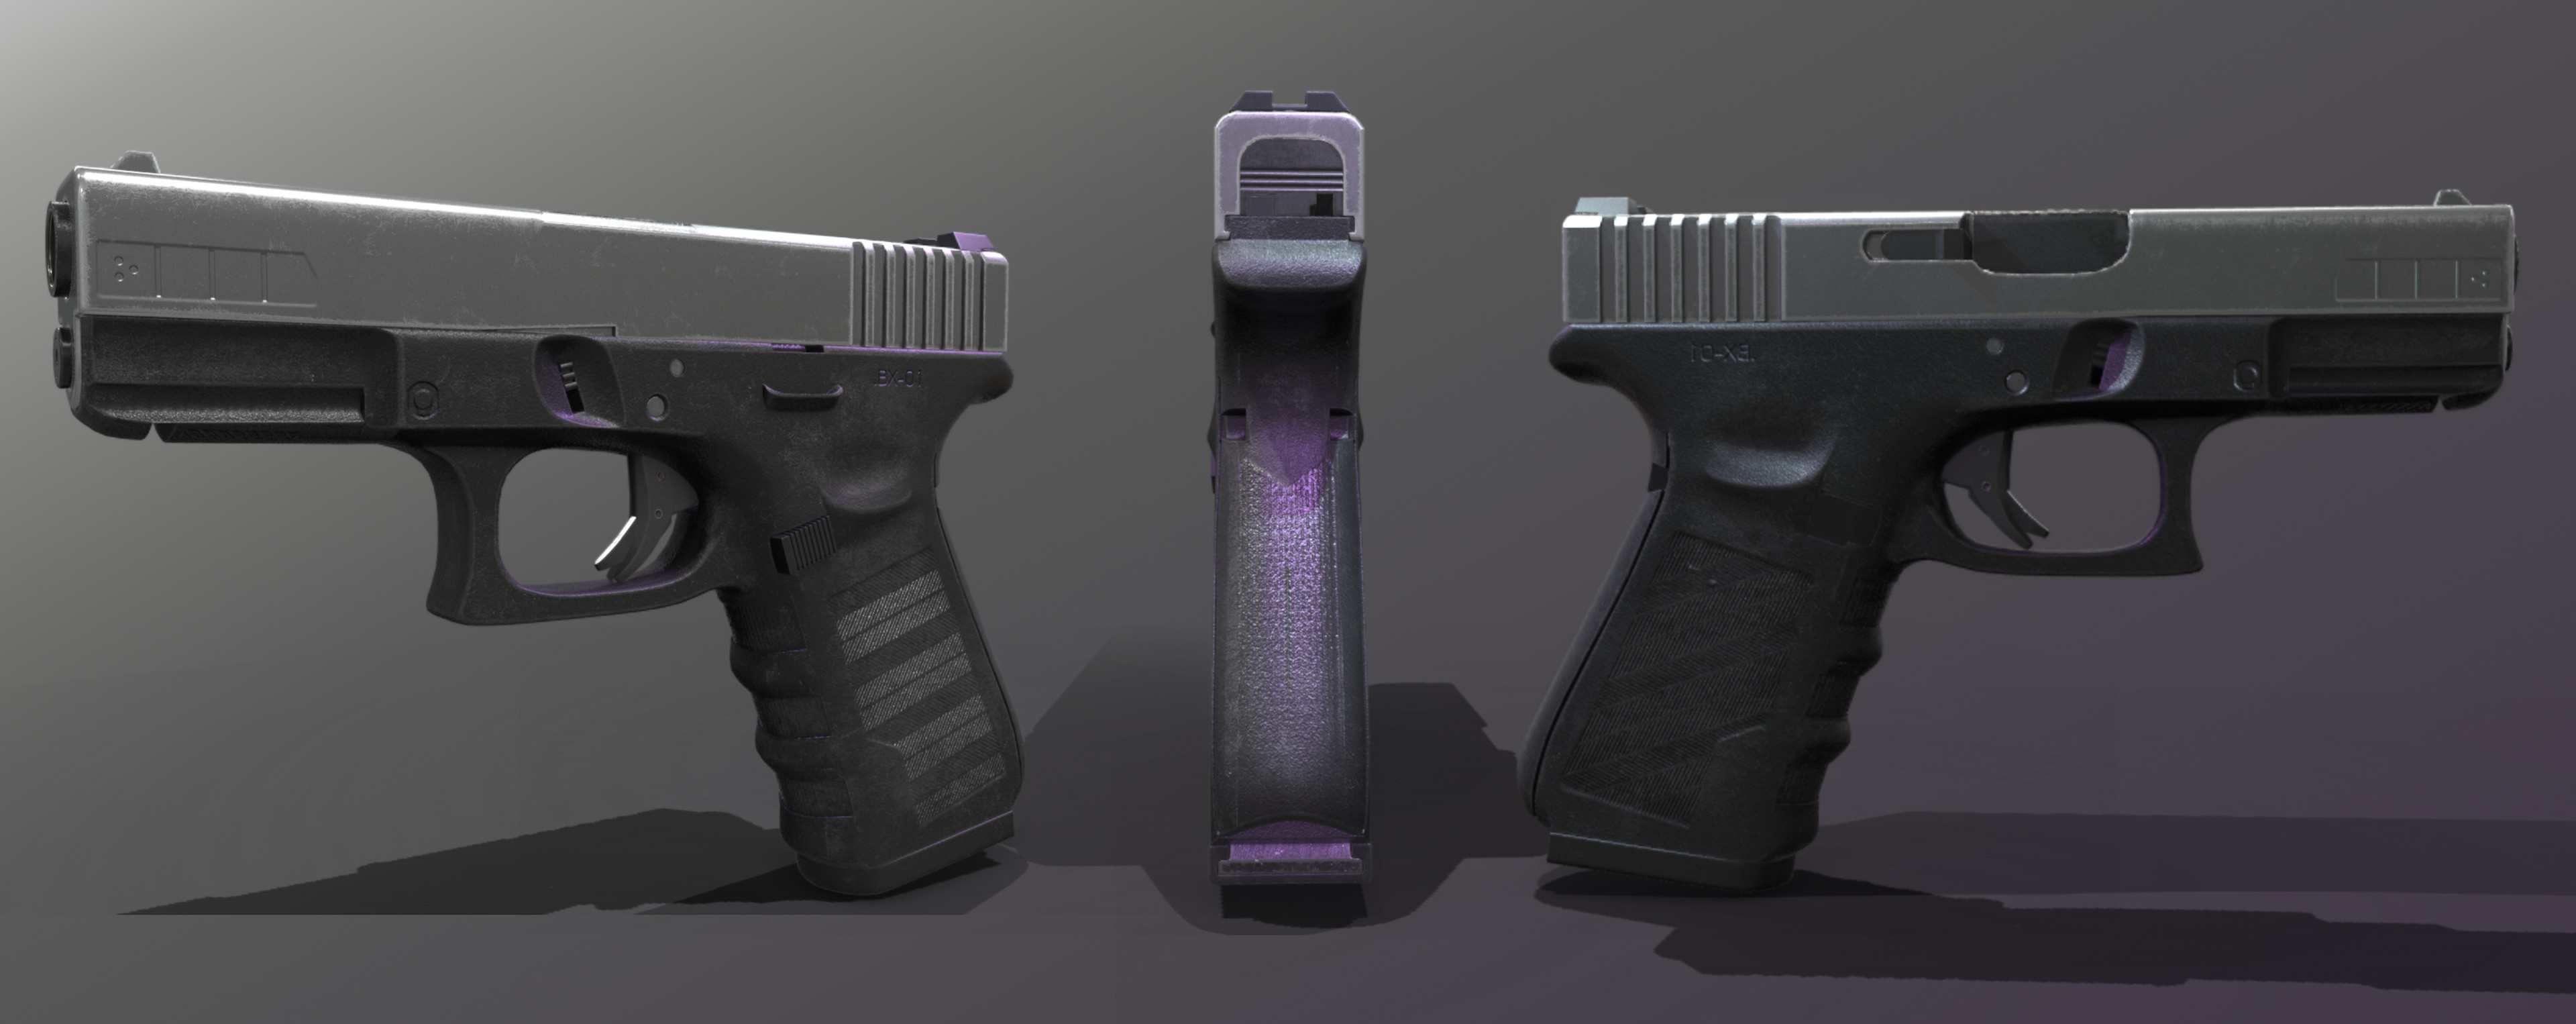 Glock 17 made for Brixton
